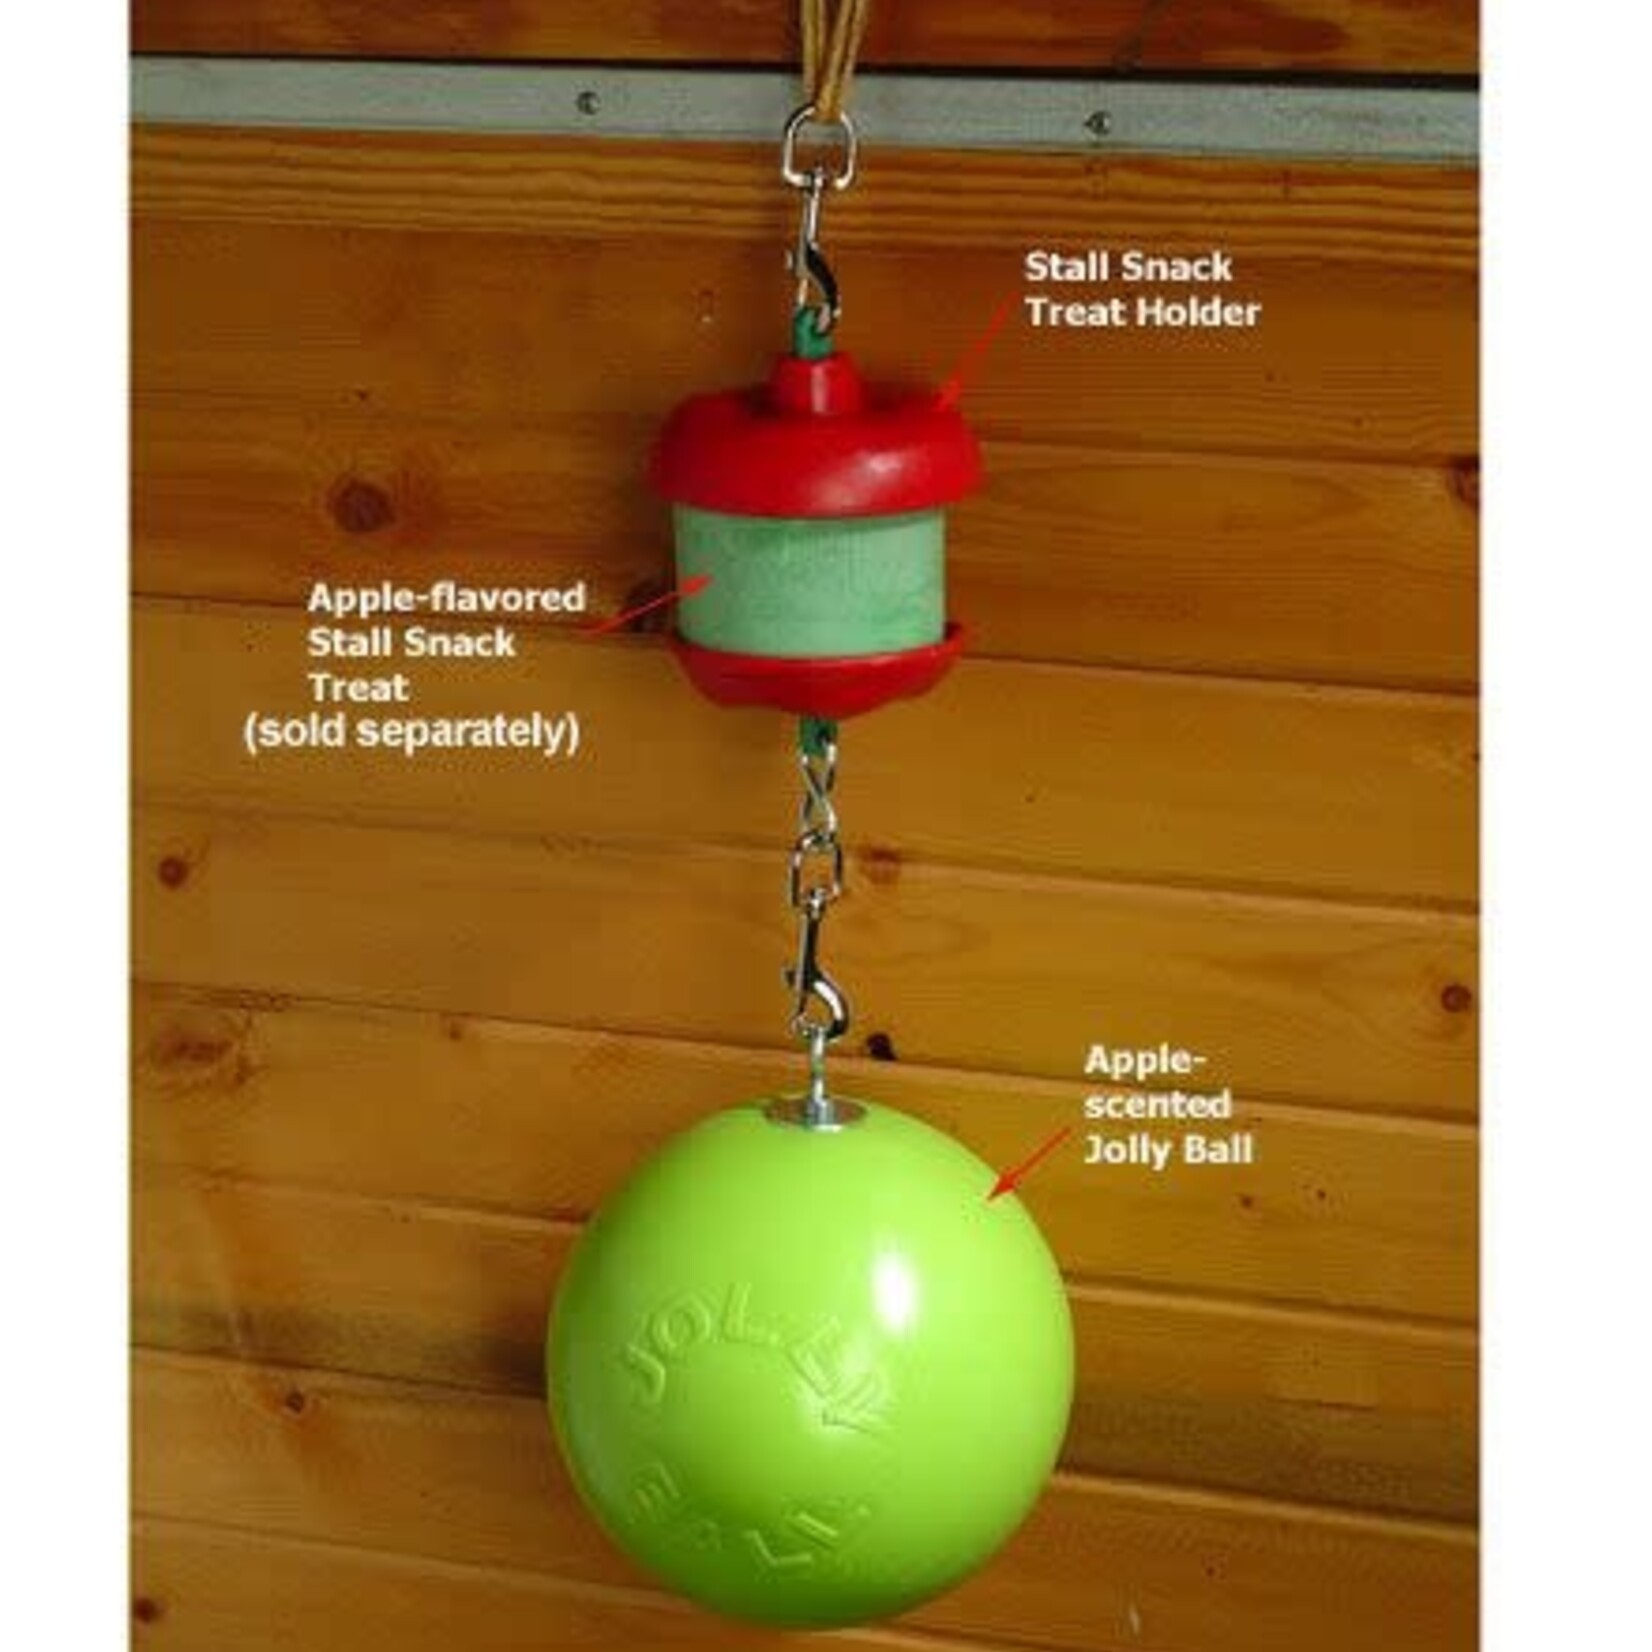 Jolly Ball Stall Snack with Apple Scented Jolly Ball